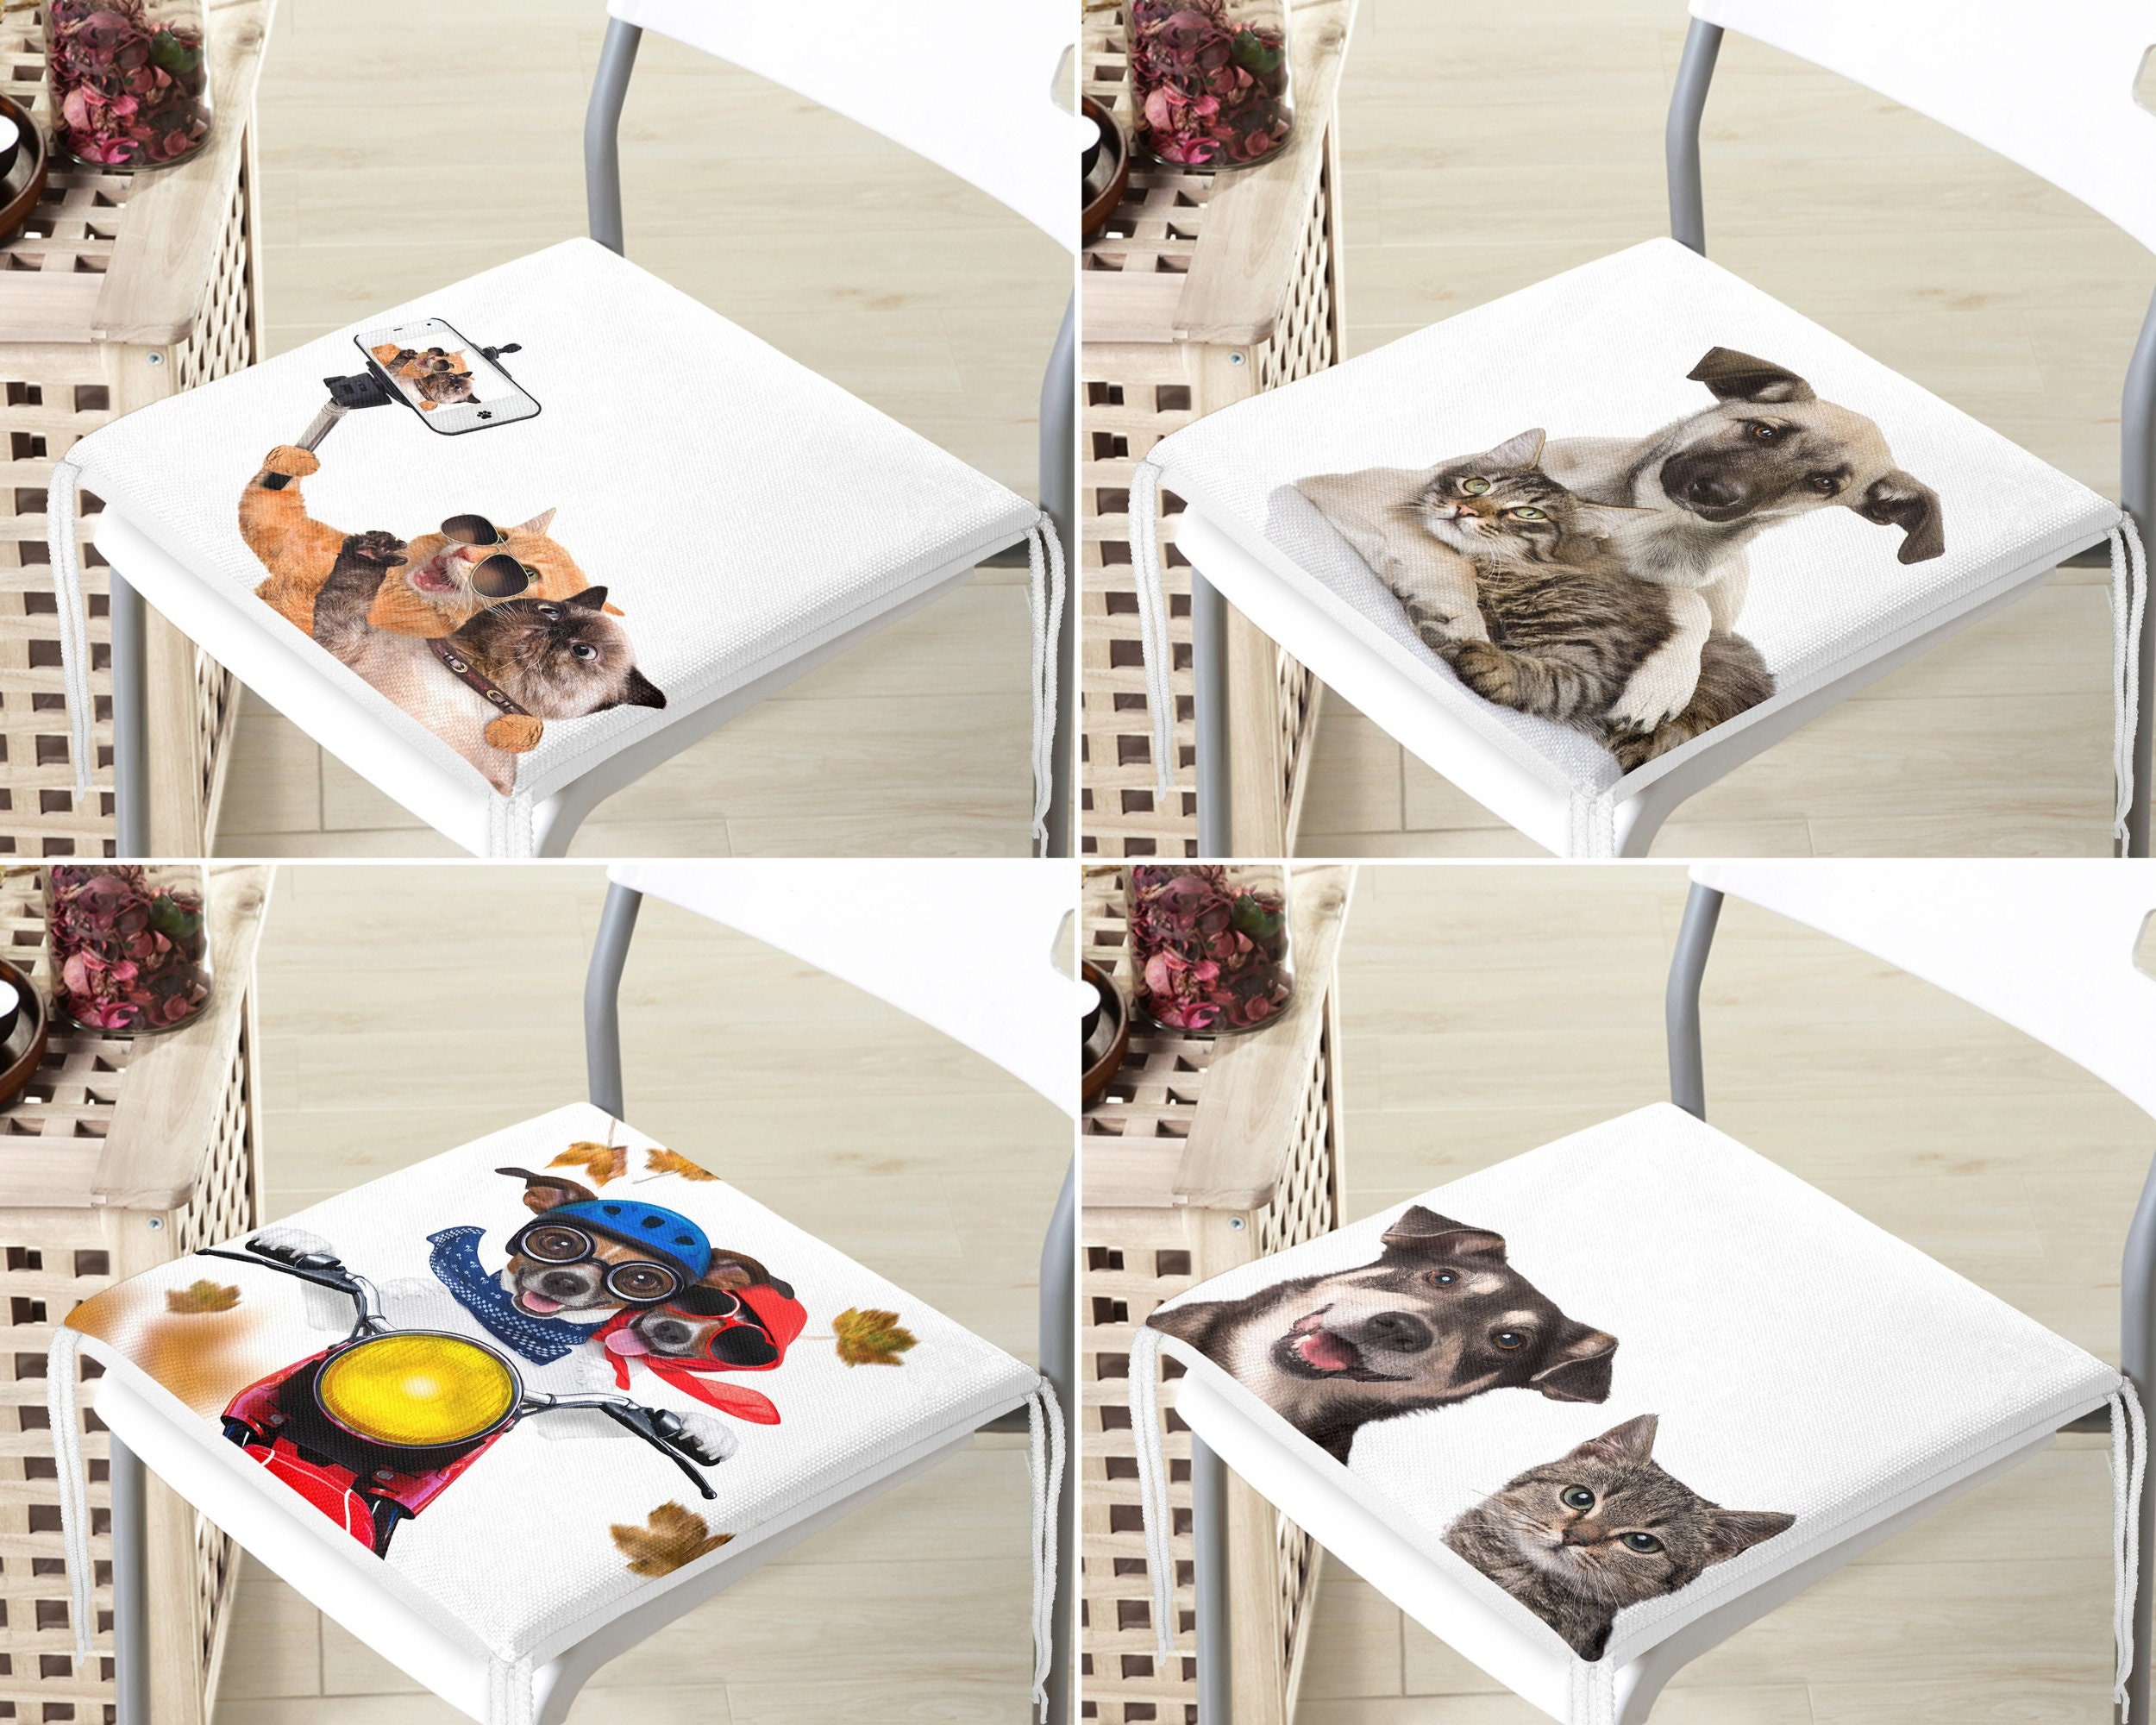 Chair Cushions Cute Cat Paw Shape Plush Cat Paw Cushion Chair For Home  Office Hotel New Style From Yutuo, $29.05